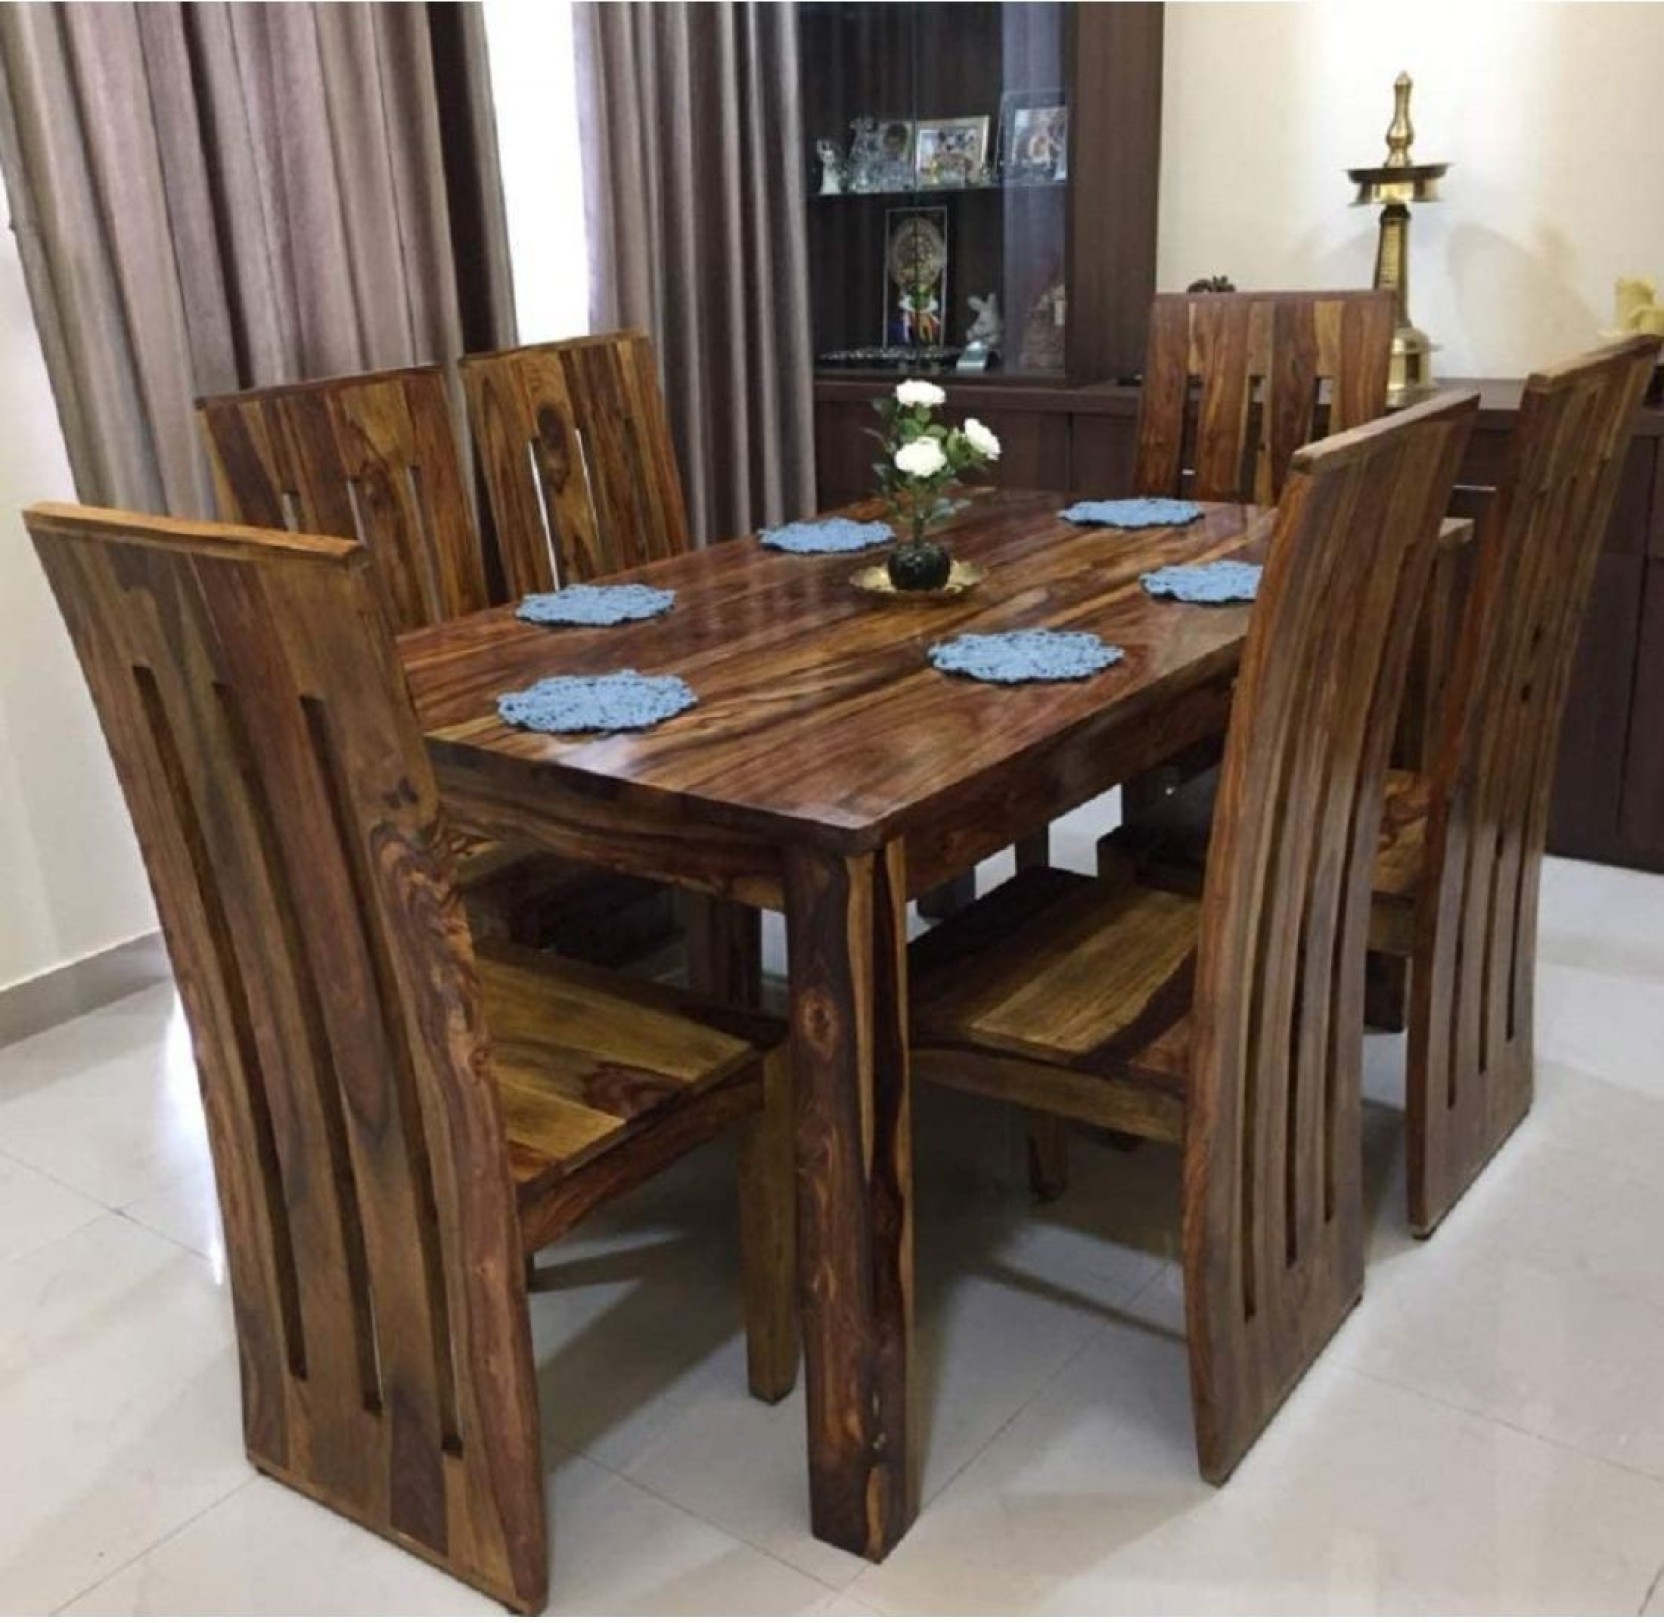 Aaram By Zebrs Premium Wooden Dining Solid Wood 6 Seater Dining Set (Finish Color -Brown, DIY(Do-It-Yourself))